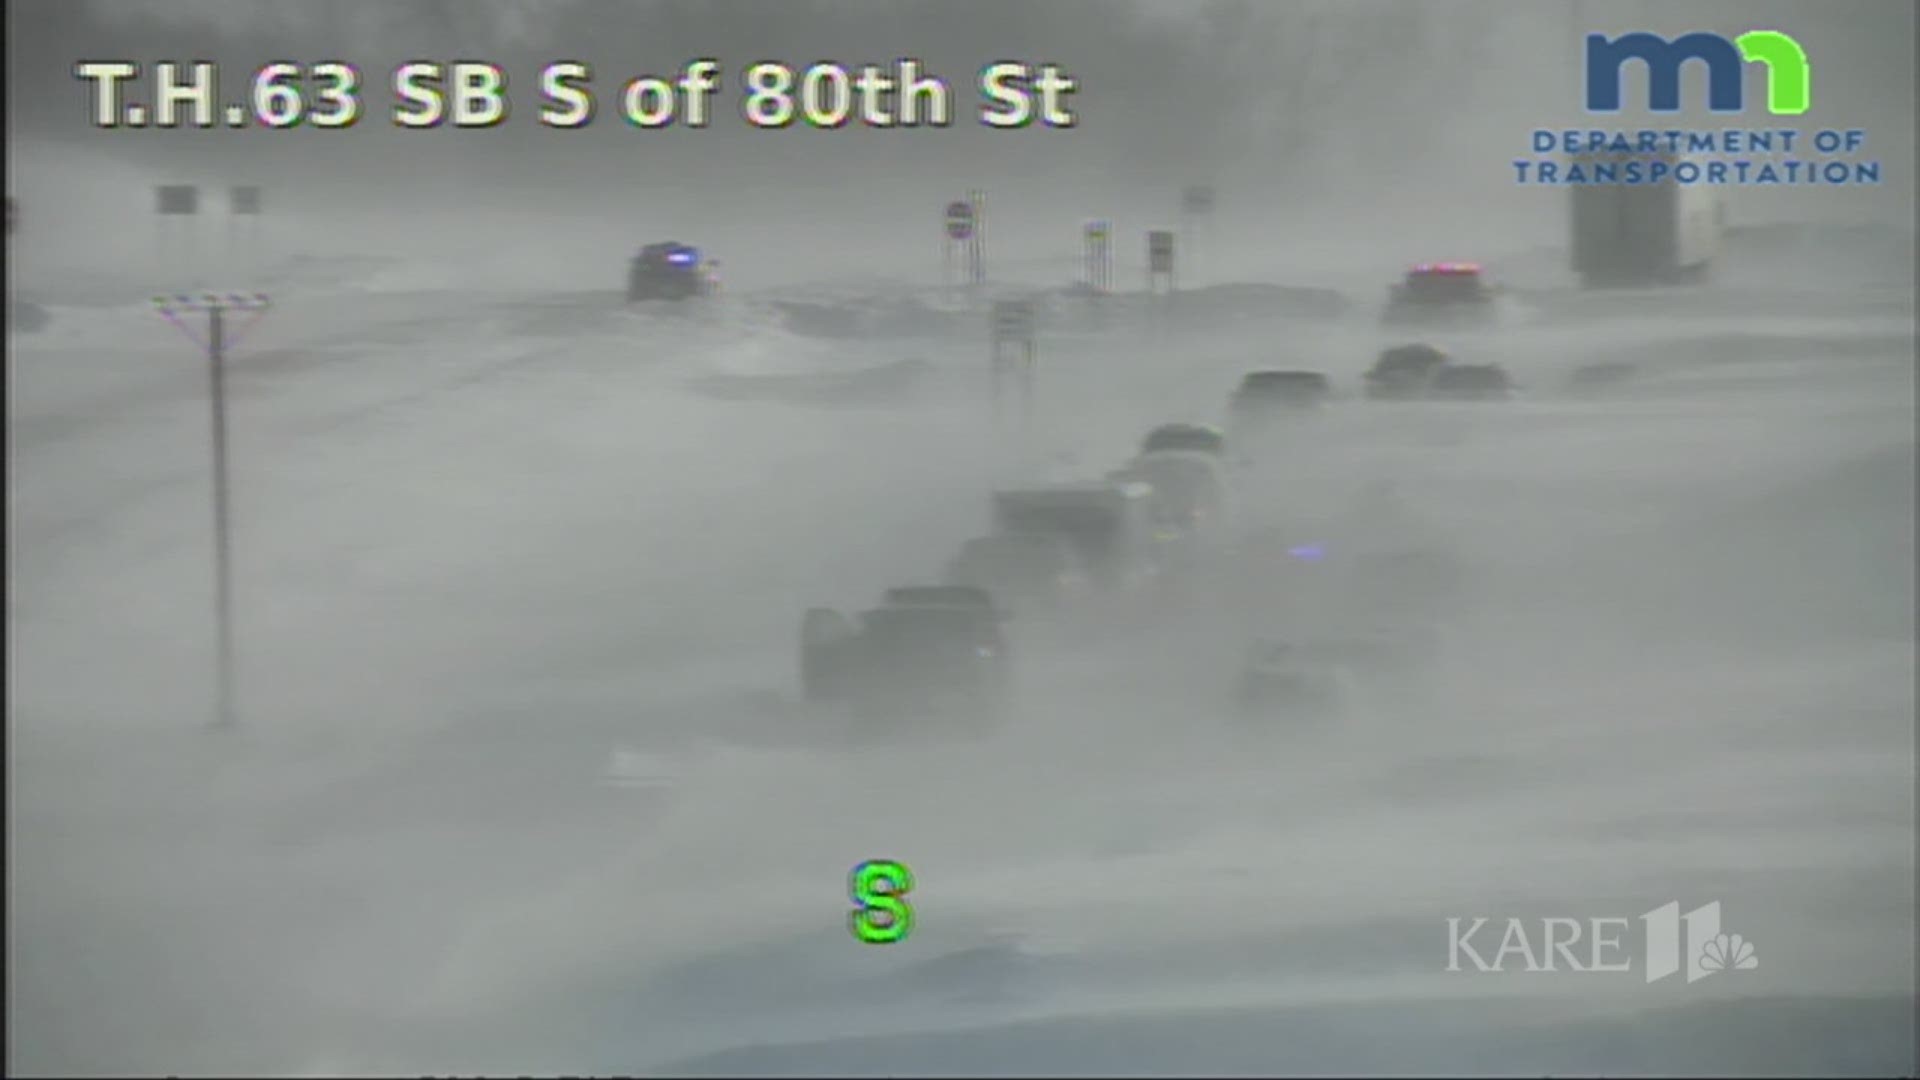 WATCH: This is why authorities are urging people not to travel in Minnesota. Traffic cameras show Highway 63 in Rochester, near the scene of an earlier pile-up crash. Deputies are now blocking the closed highway. https://kare11.tv/2IxA3ri